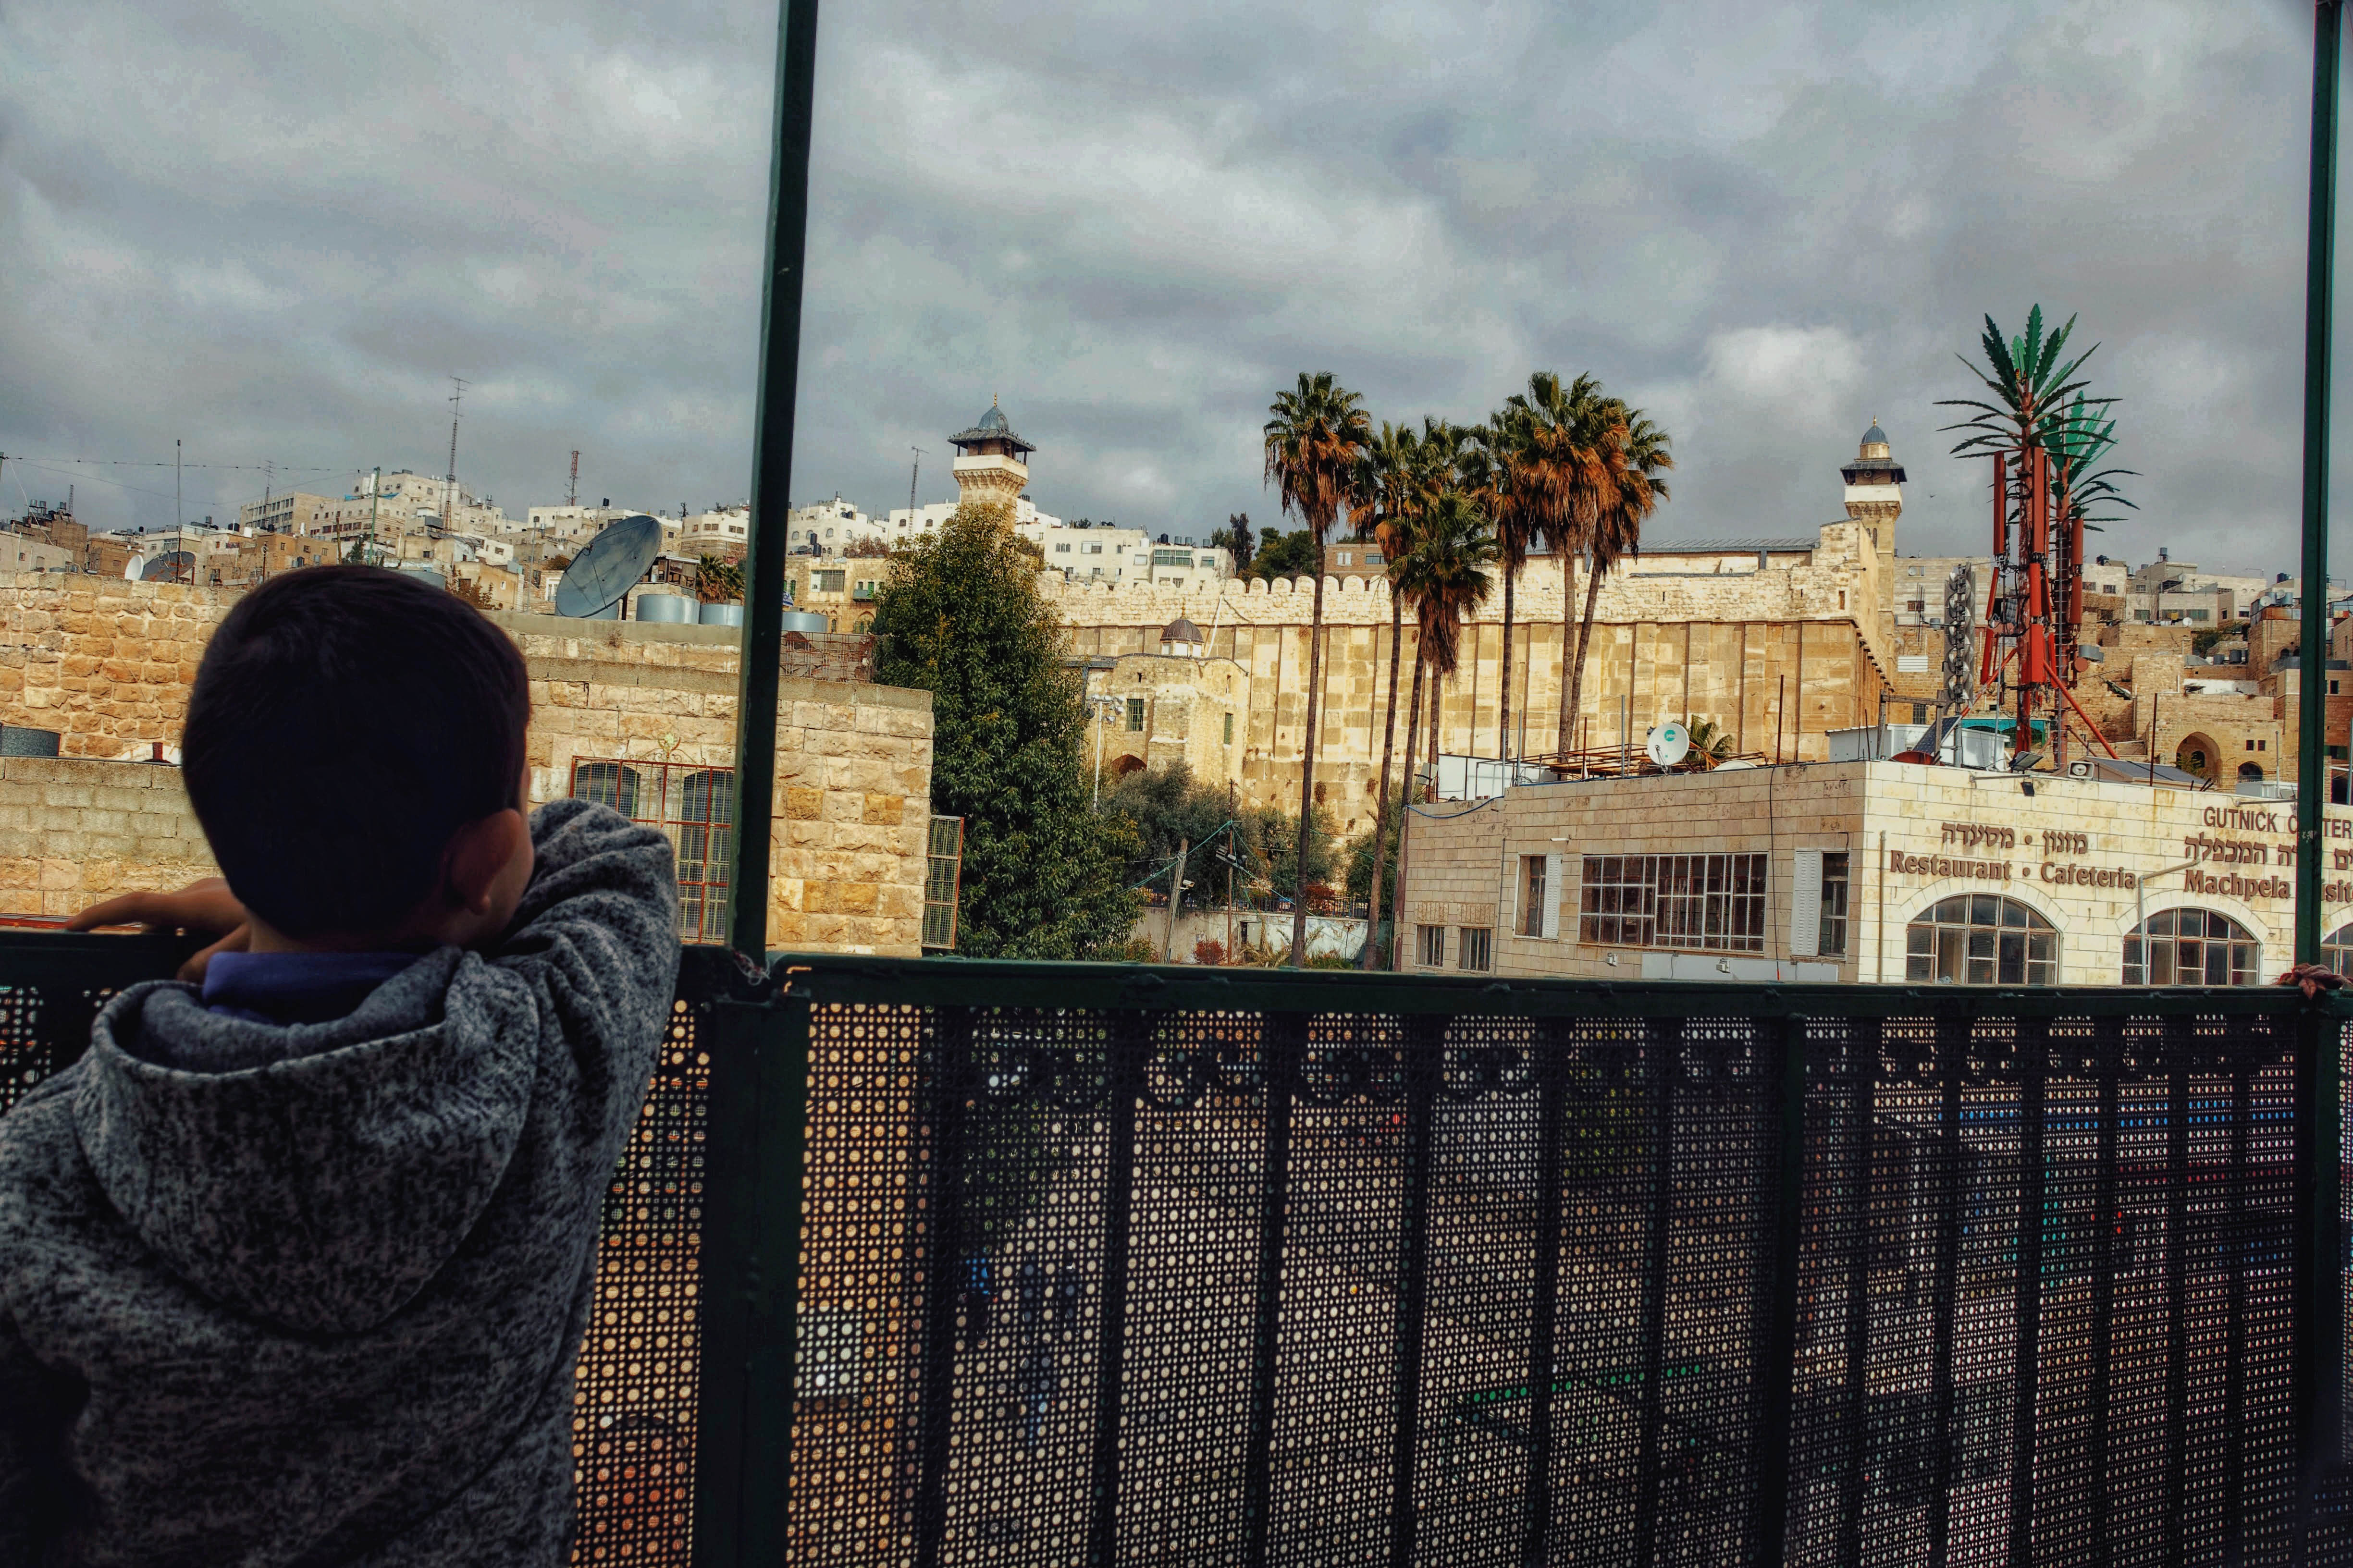 The child looks at the holy place where the tombs of the prophets are located, and contemplates the religious stories and historic stories of his ancestors in the city .